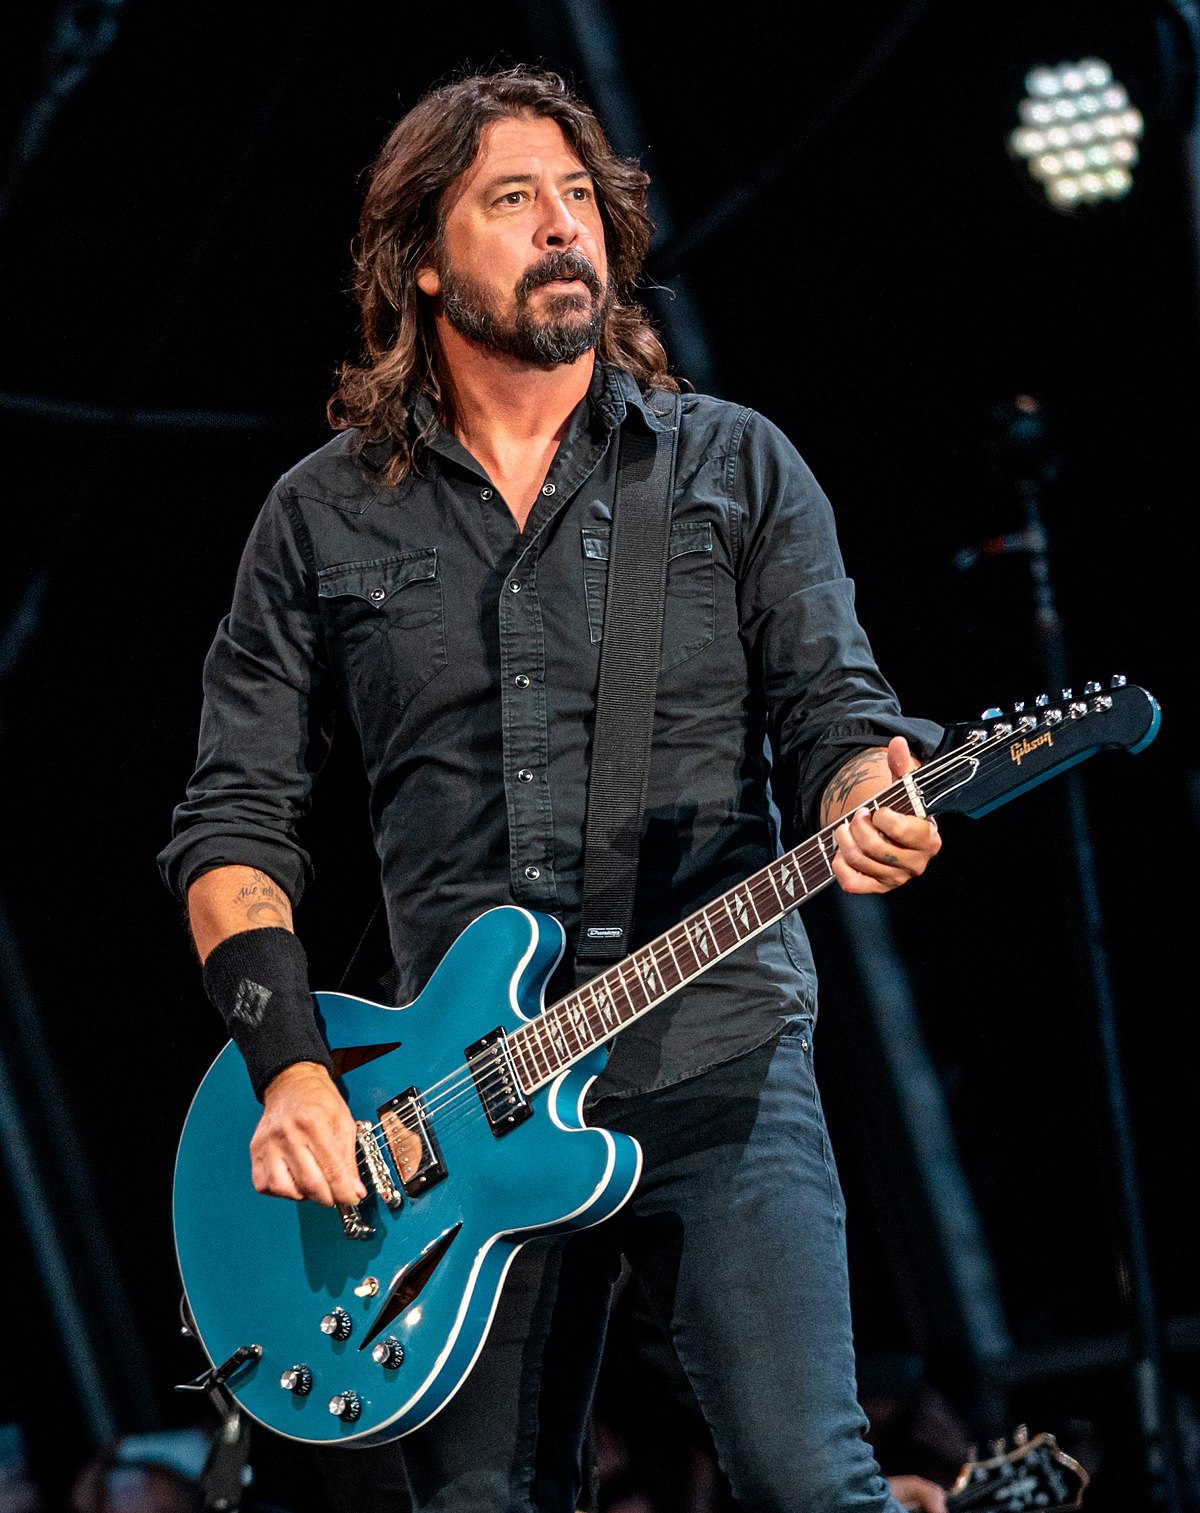 Dave Grohl - Biography, Height & Life Story | Super Stars Bio